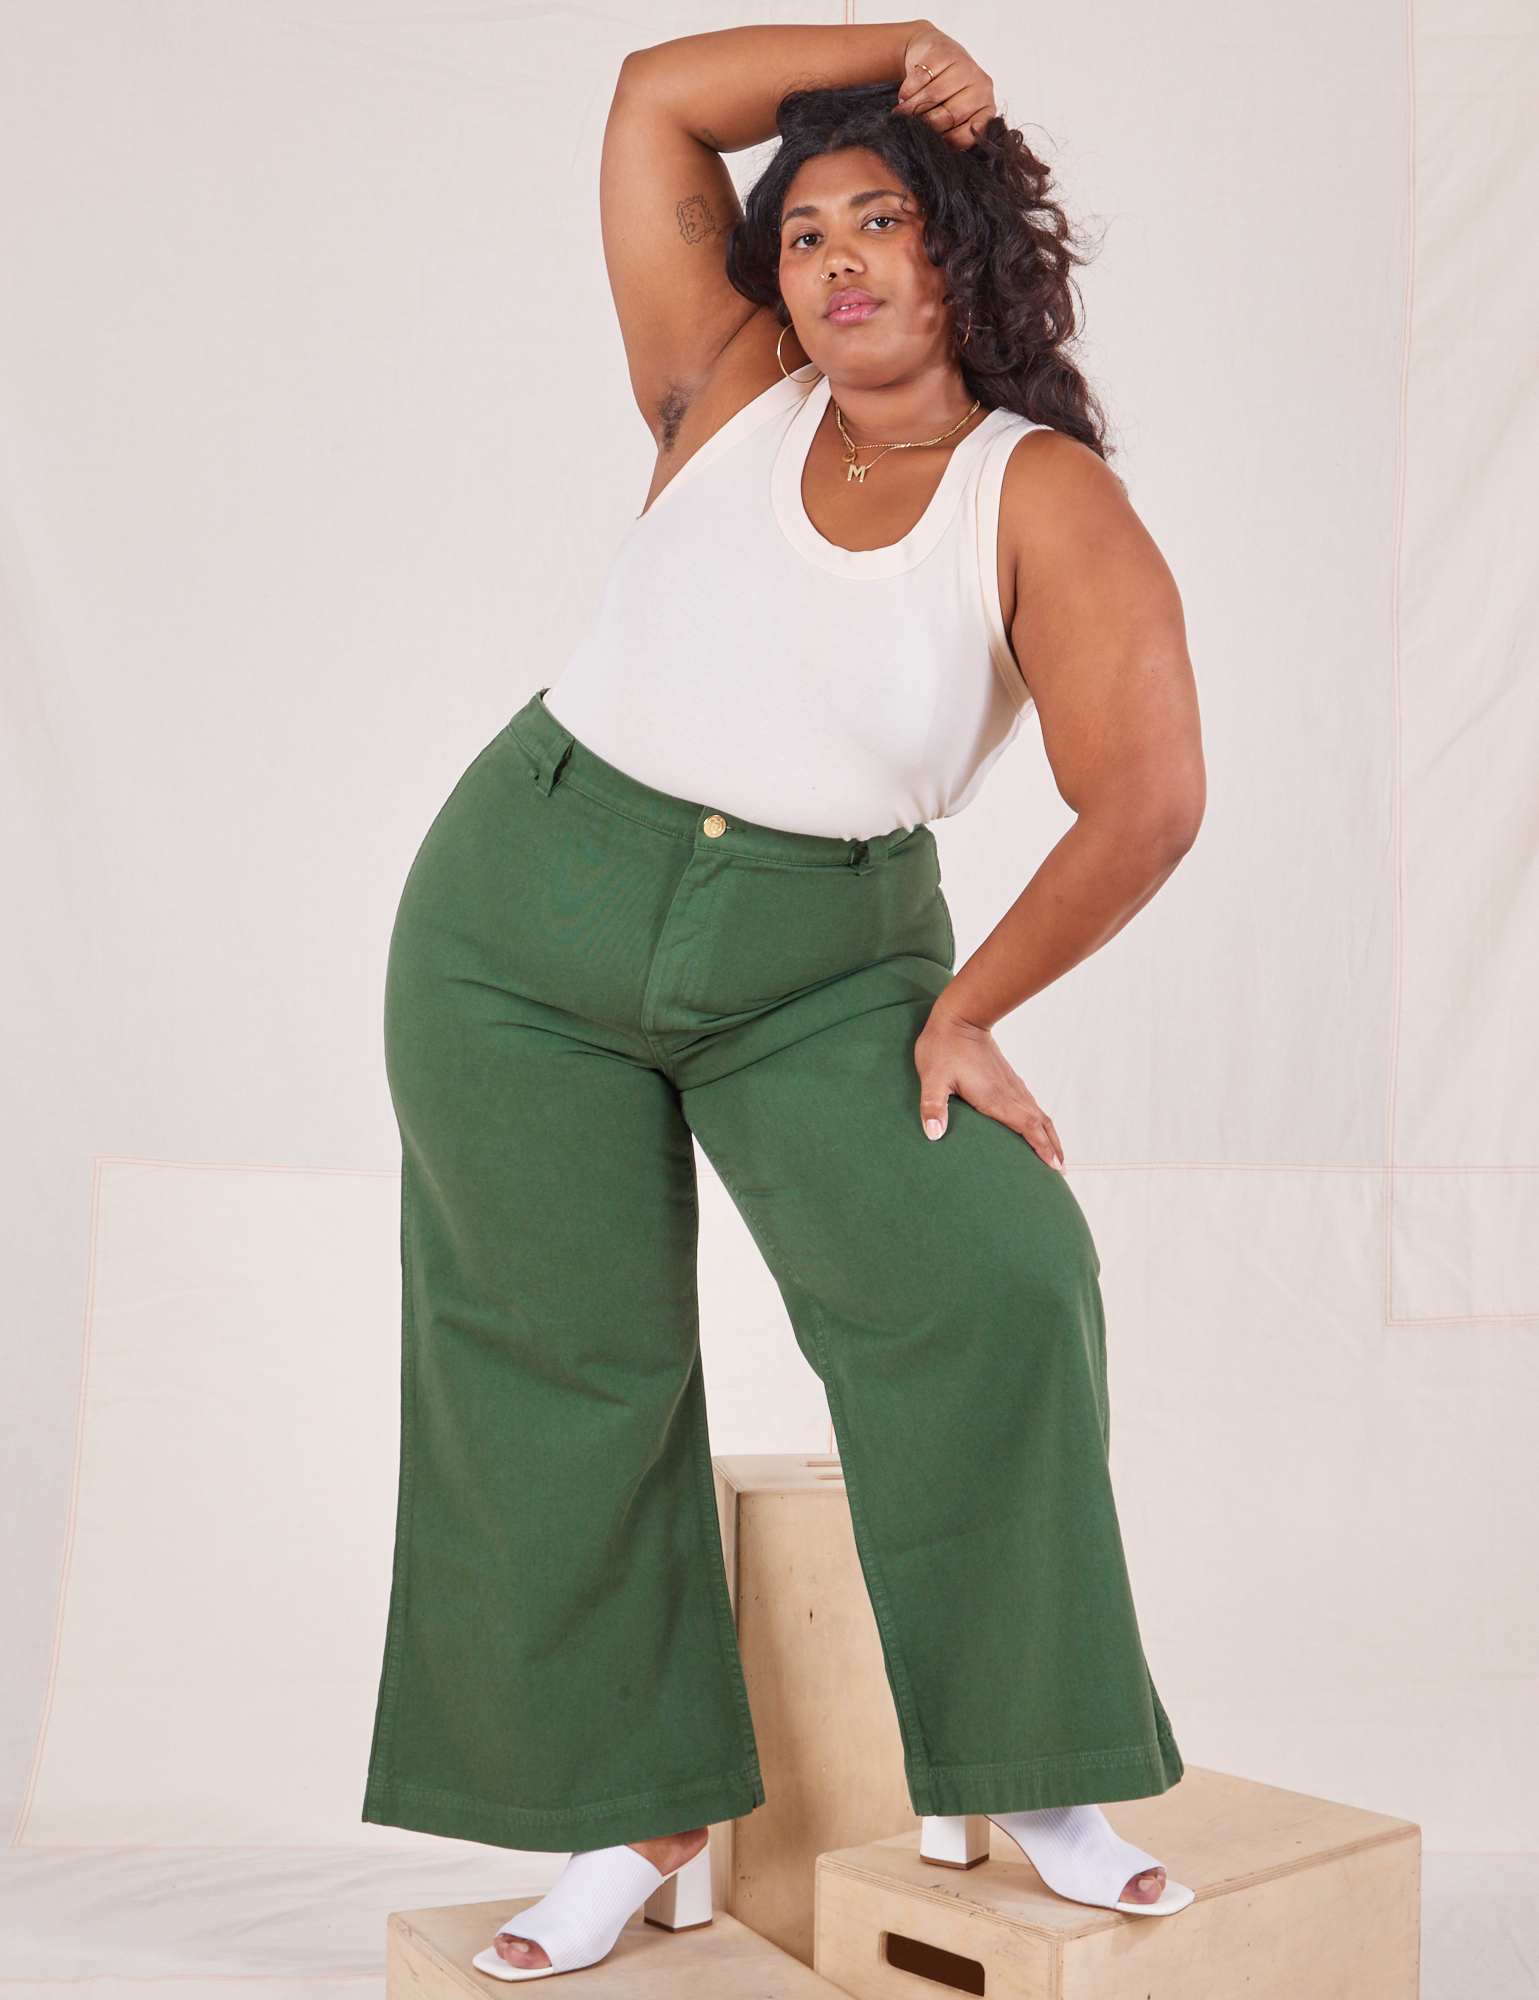 Morgan is wearing Bell Bottoms in Dark Emerald Green and vintage off-white Tank Top